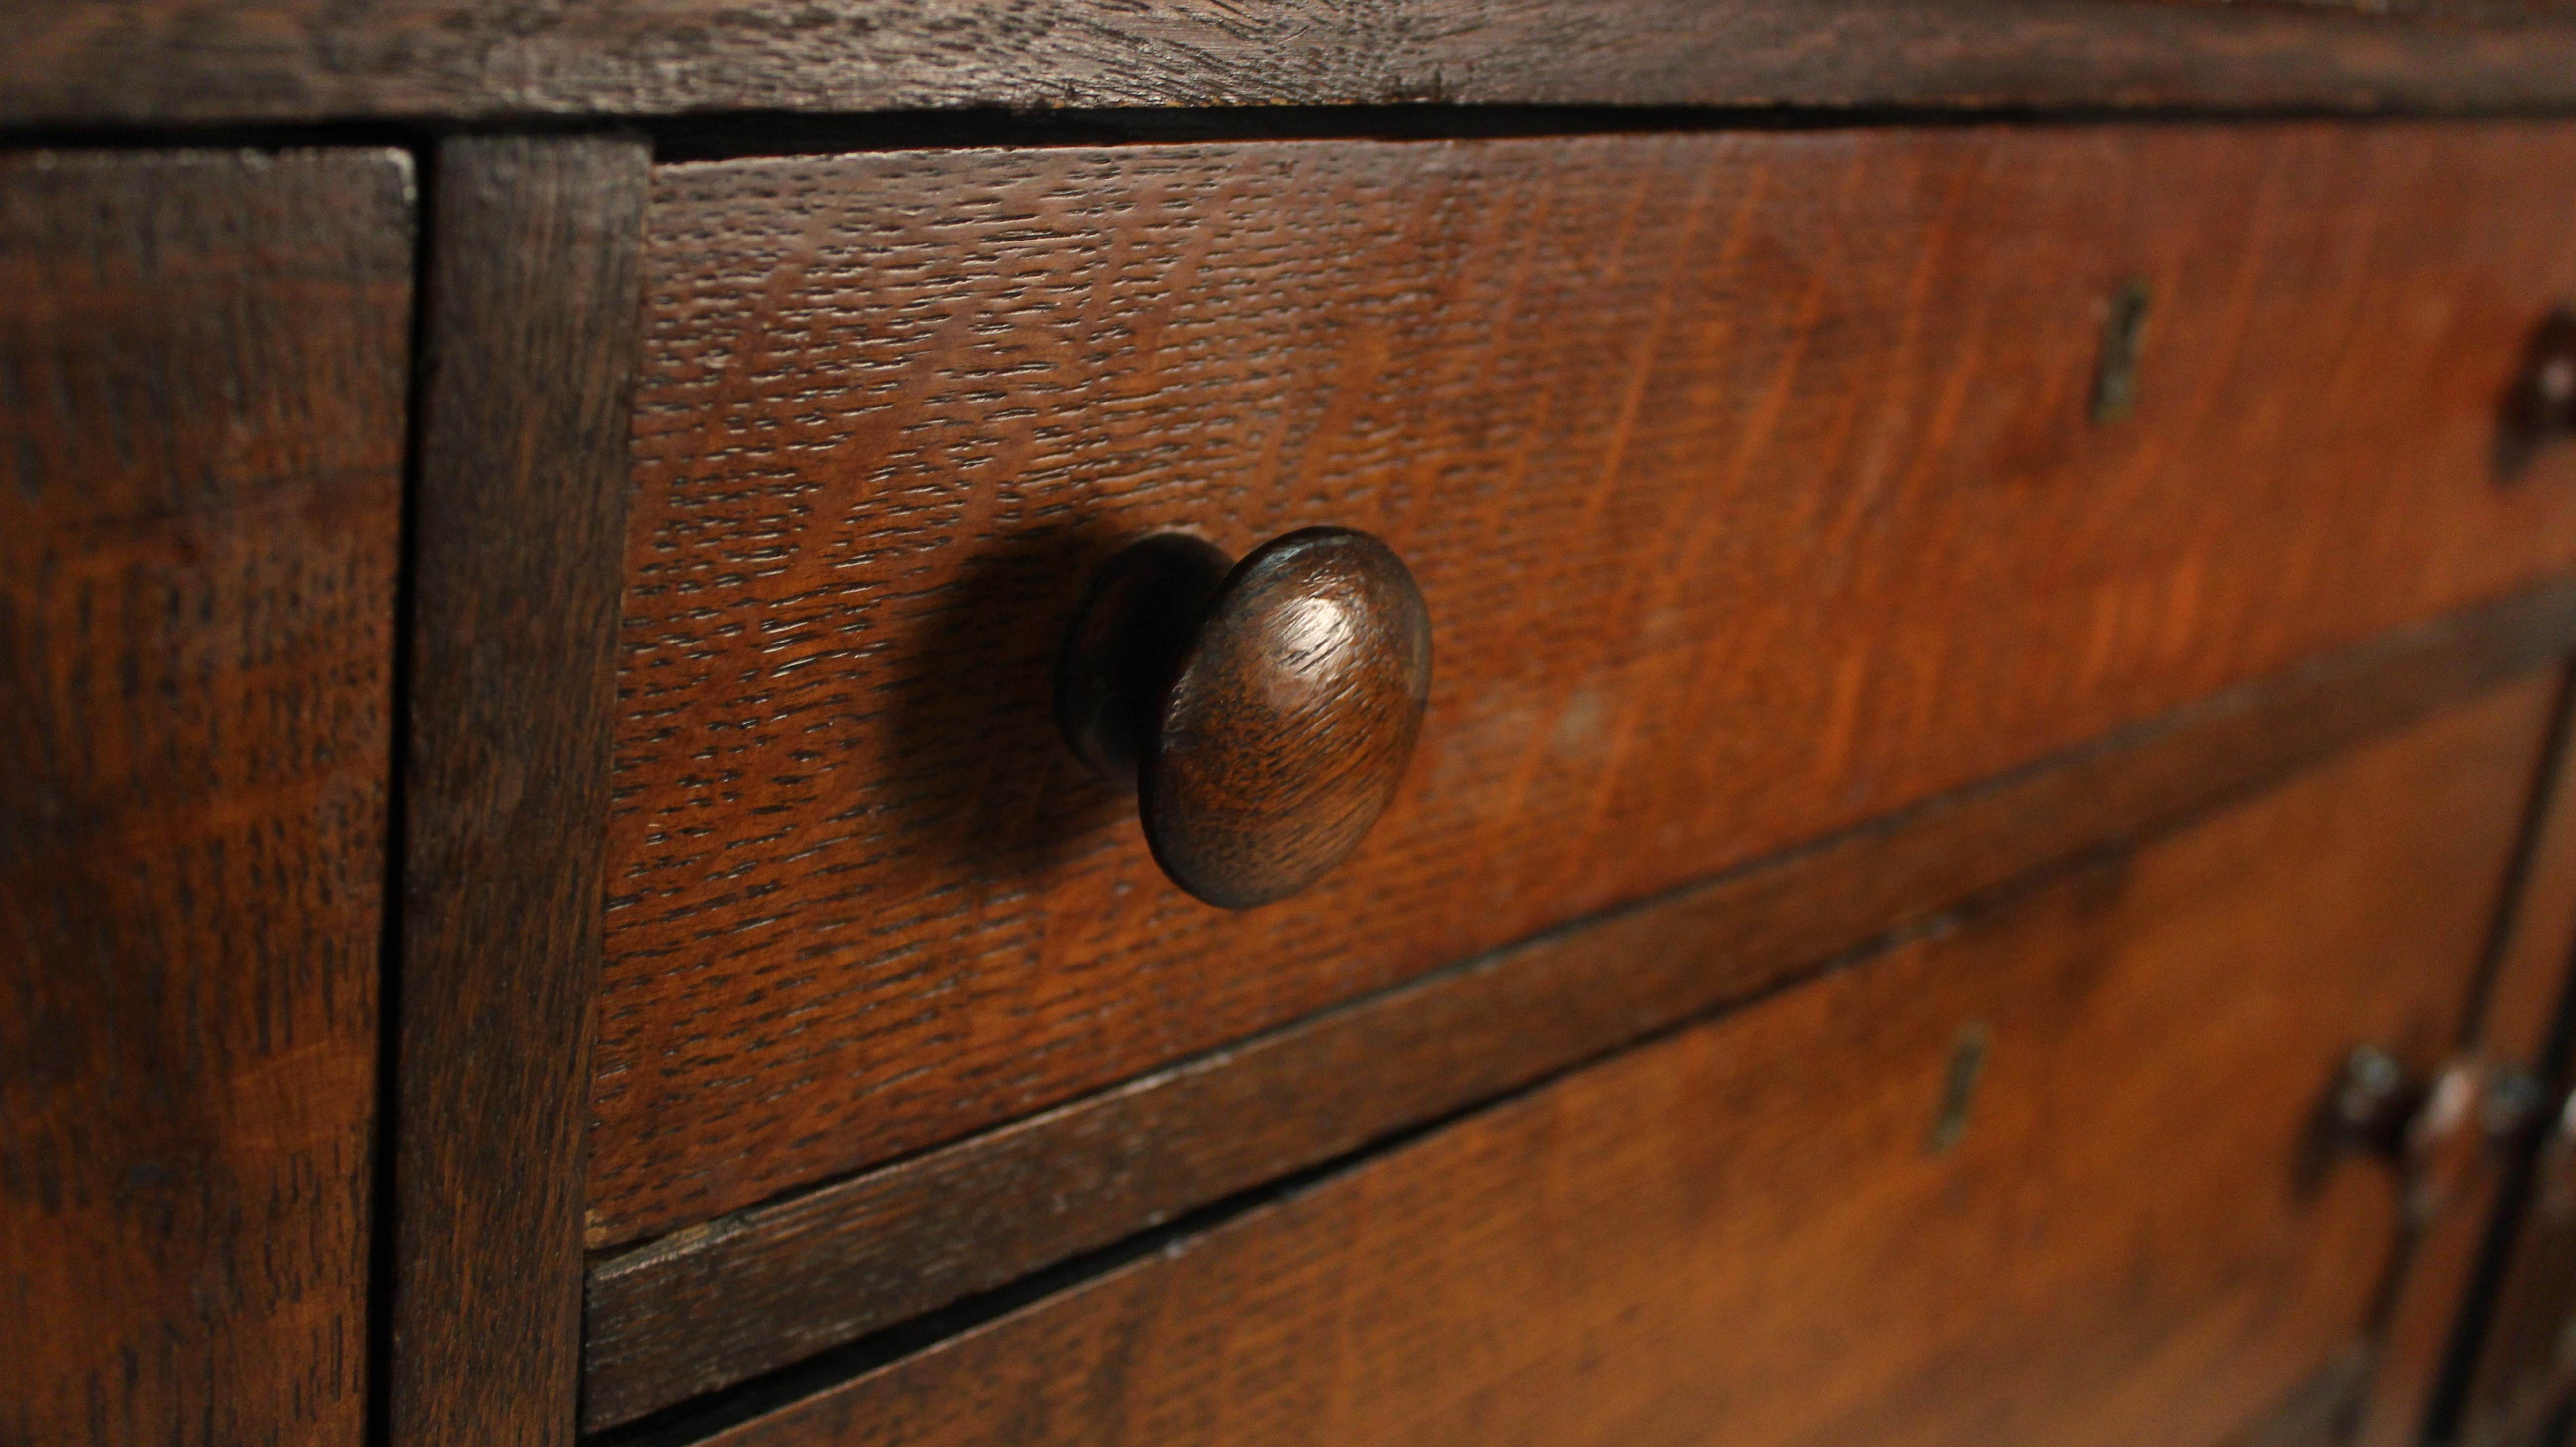 Early 20th Century Mission Arts Crafts Oak Sideboard, circa 1910